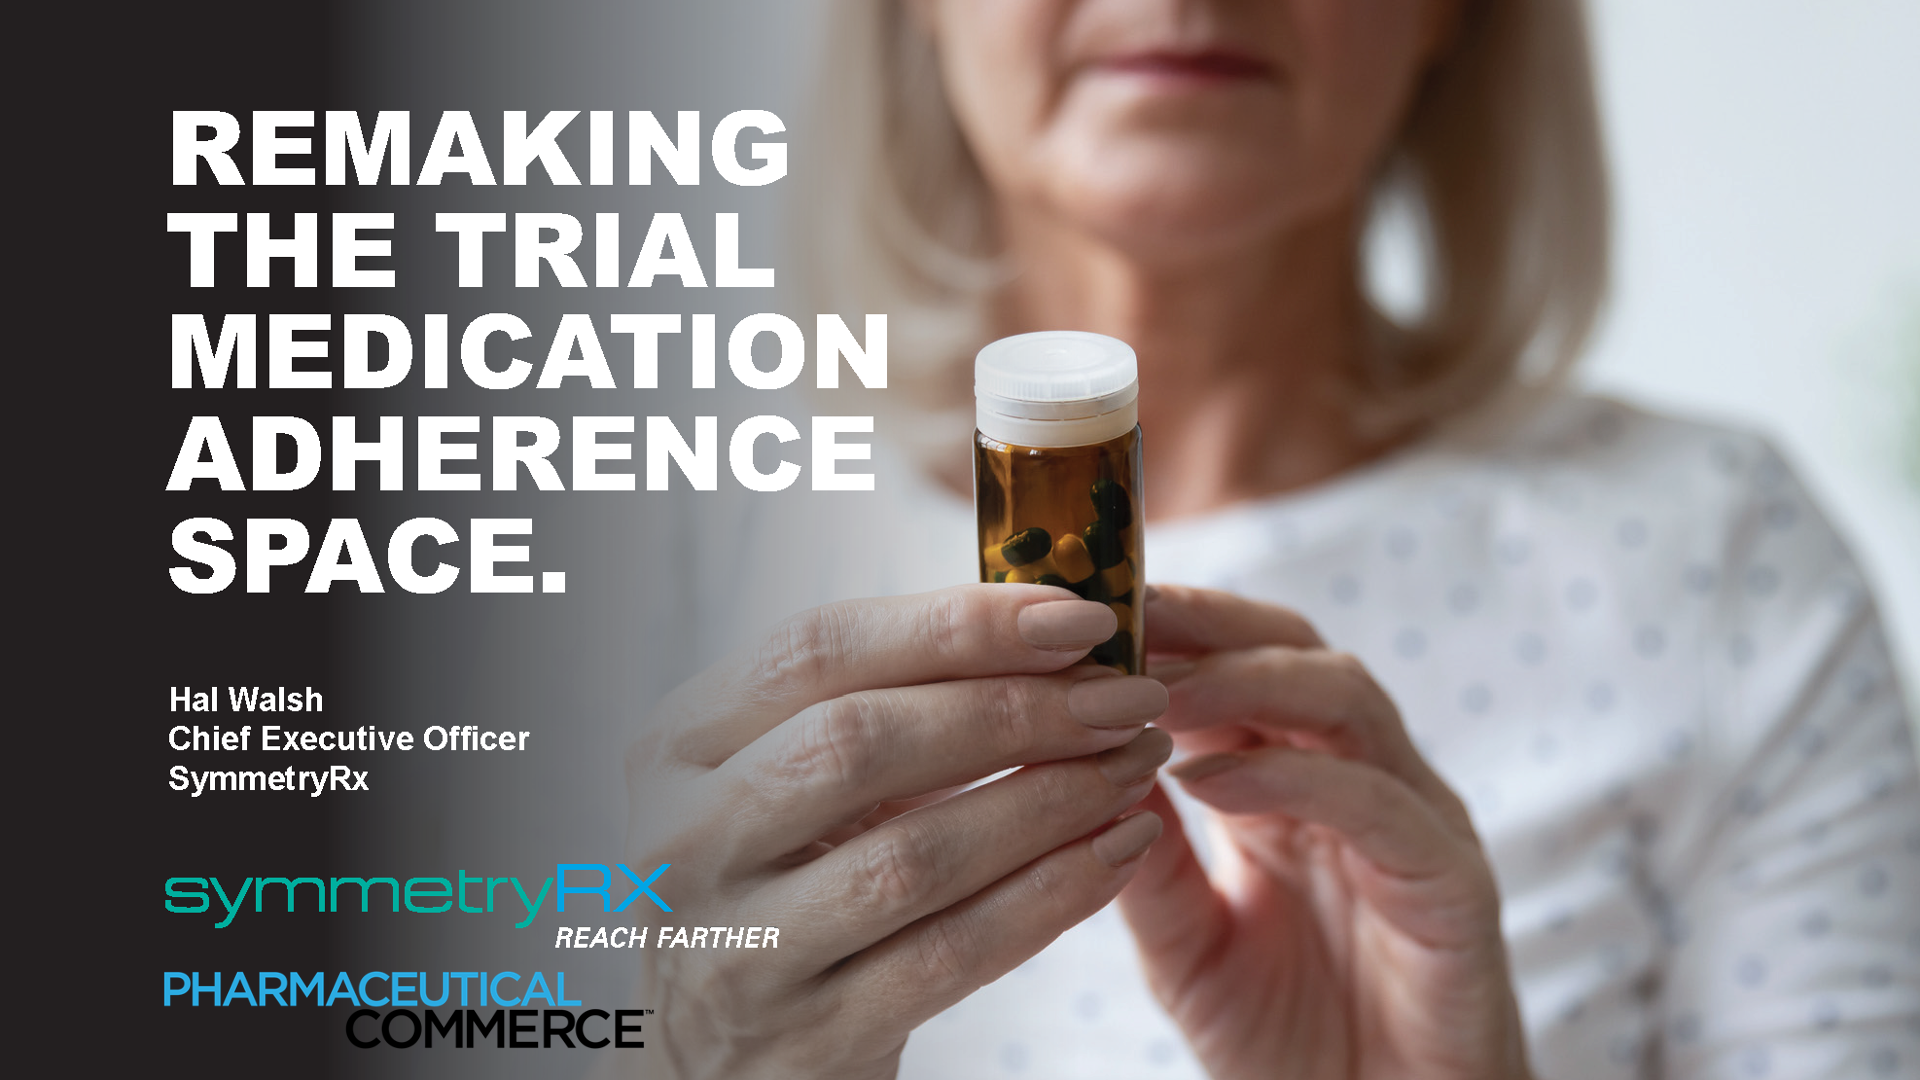 Remaking the Trial Medication Adherence Space